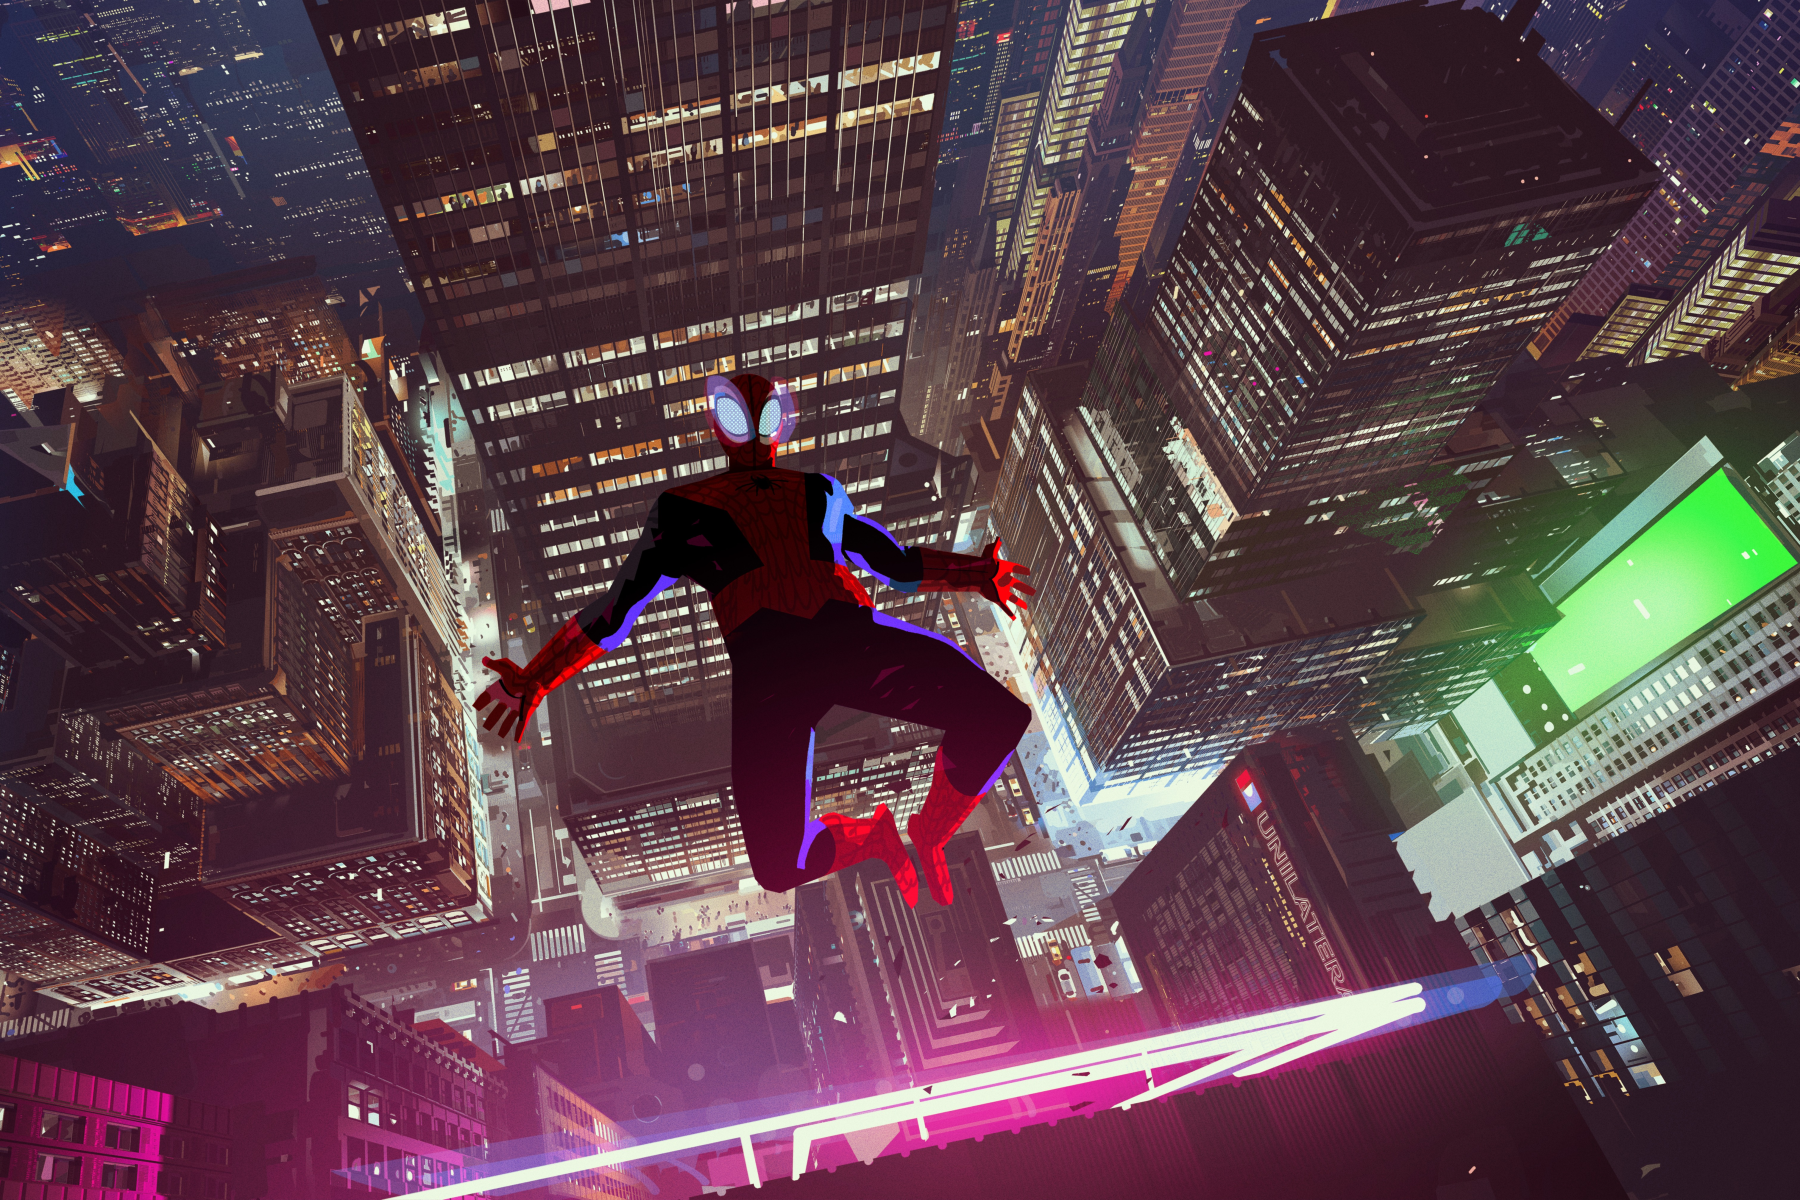 SPIDER-MAN: INTO THE SPIDER-VERSE (USA, 2018). Sony Pictures Animation Inc., 2018 MARVEL, SPAI. All Rights Reserved.  